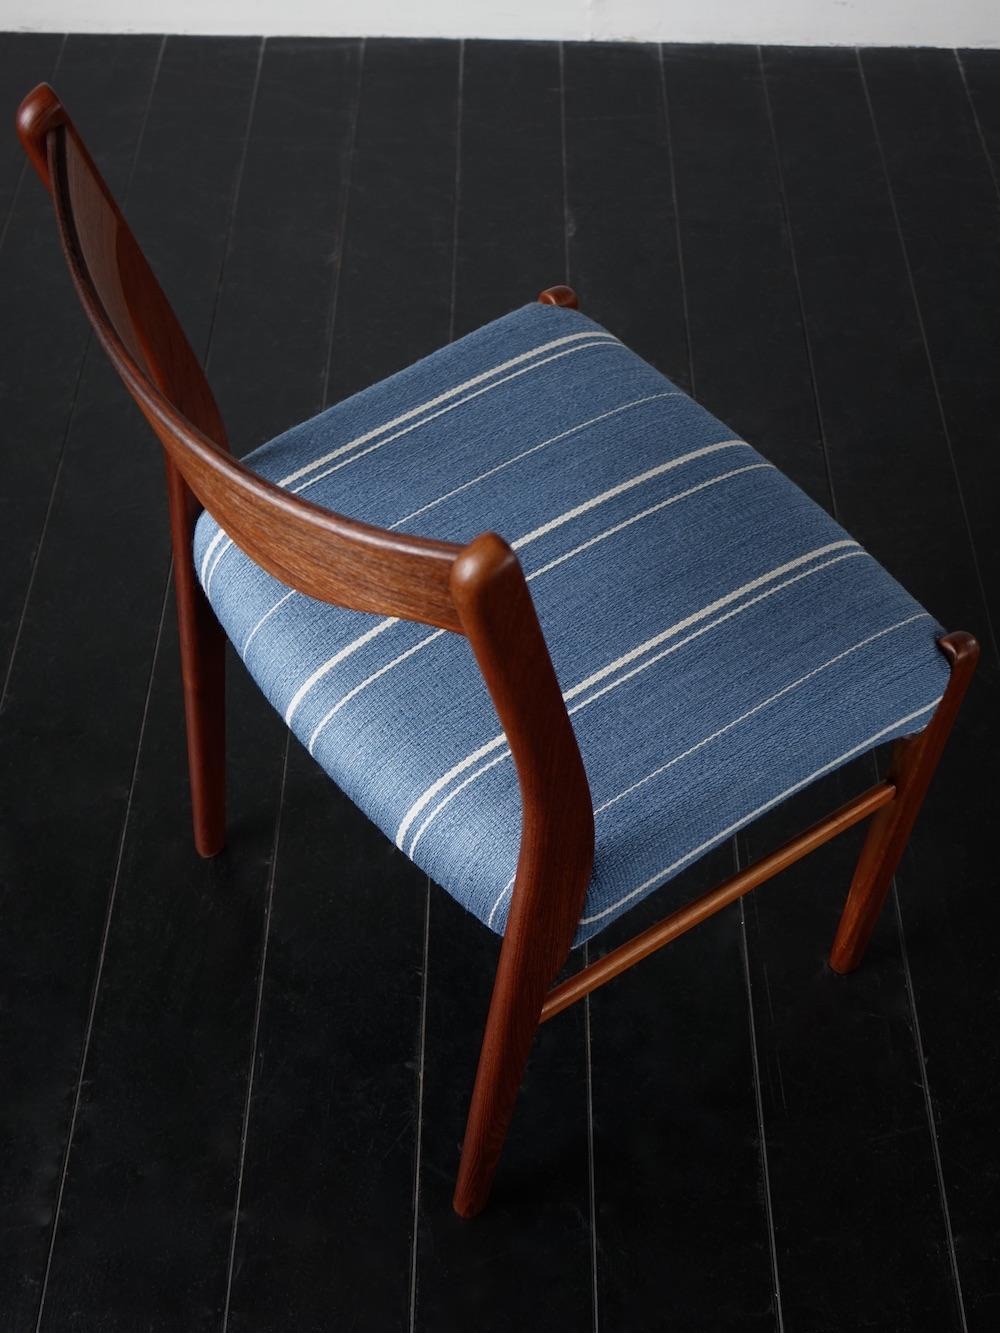 ”GS61″ Dining chair by Arne Wahl Iversen for Glyngøre Stolefabrik